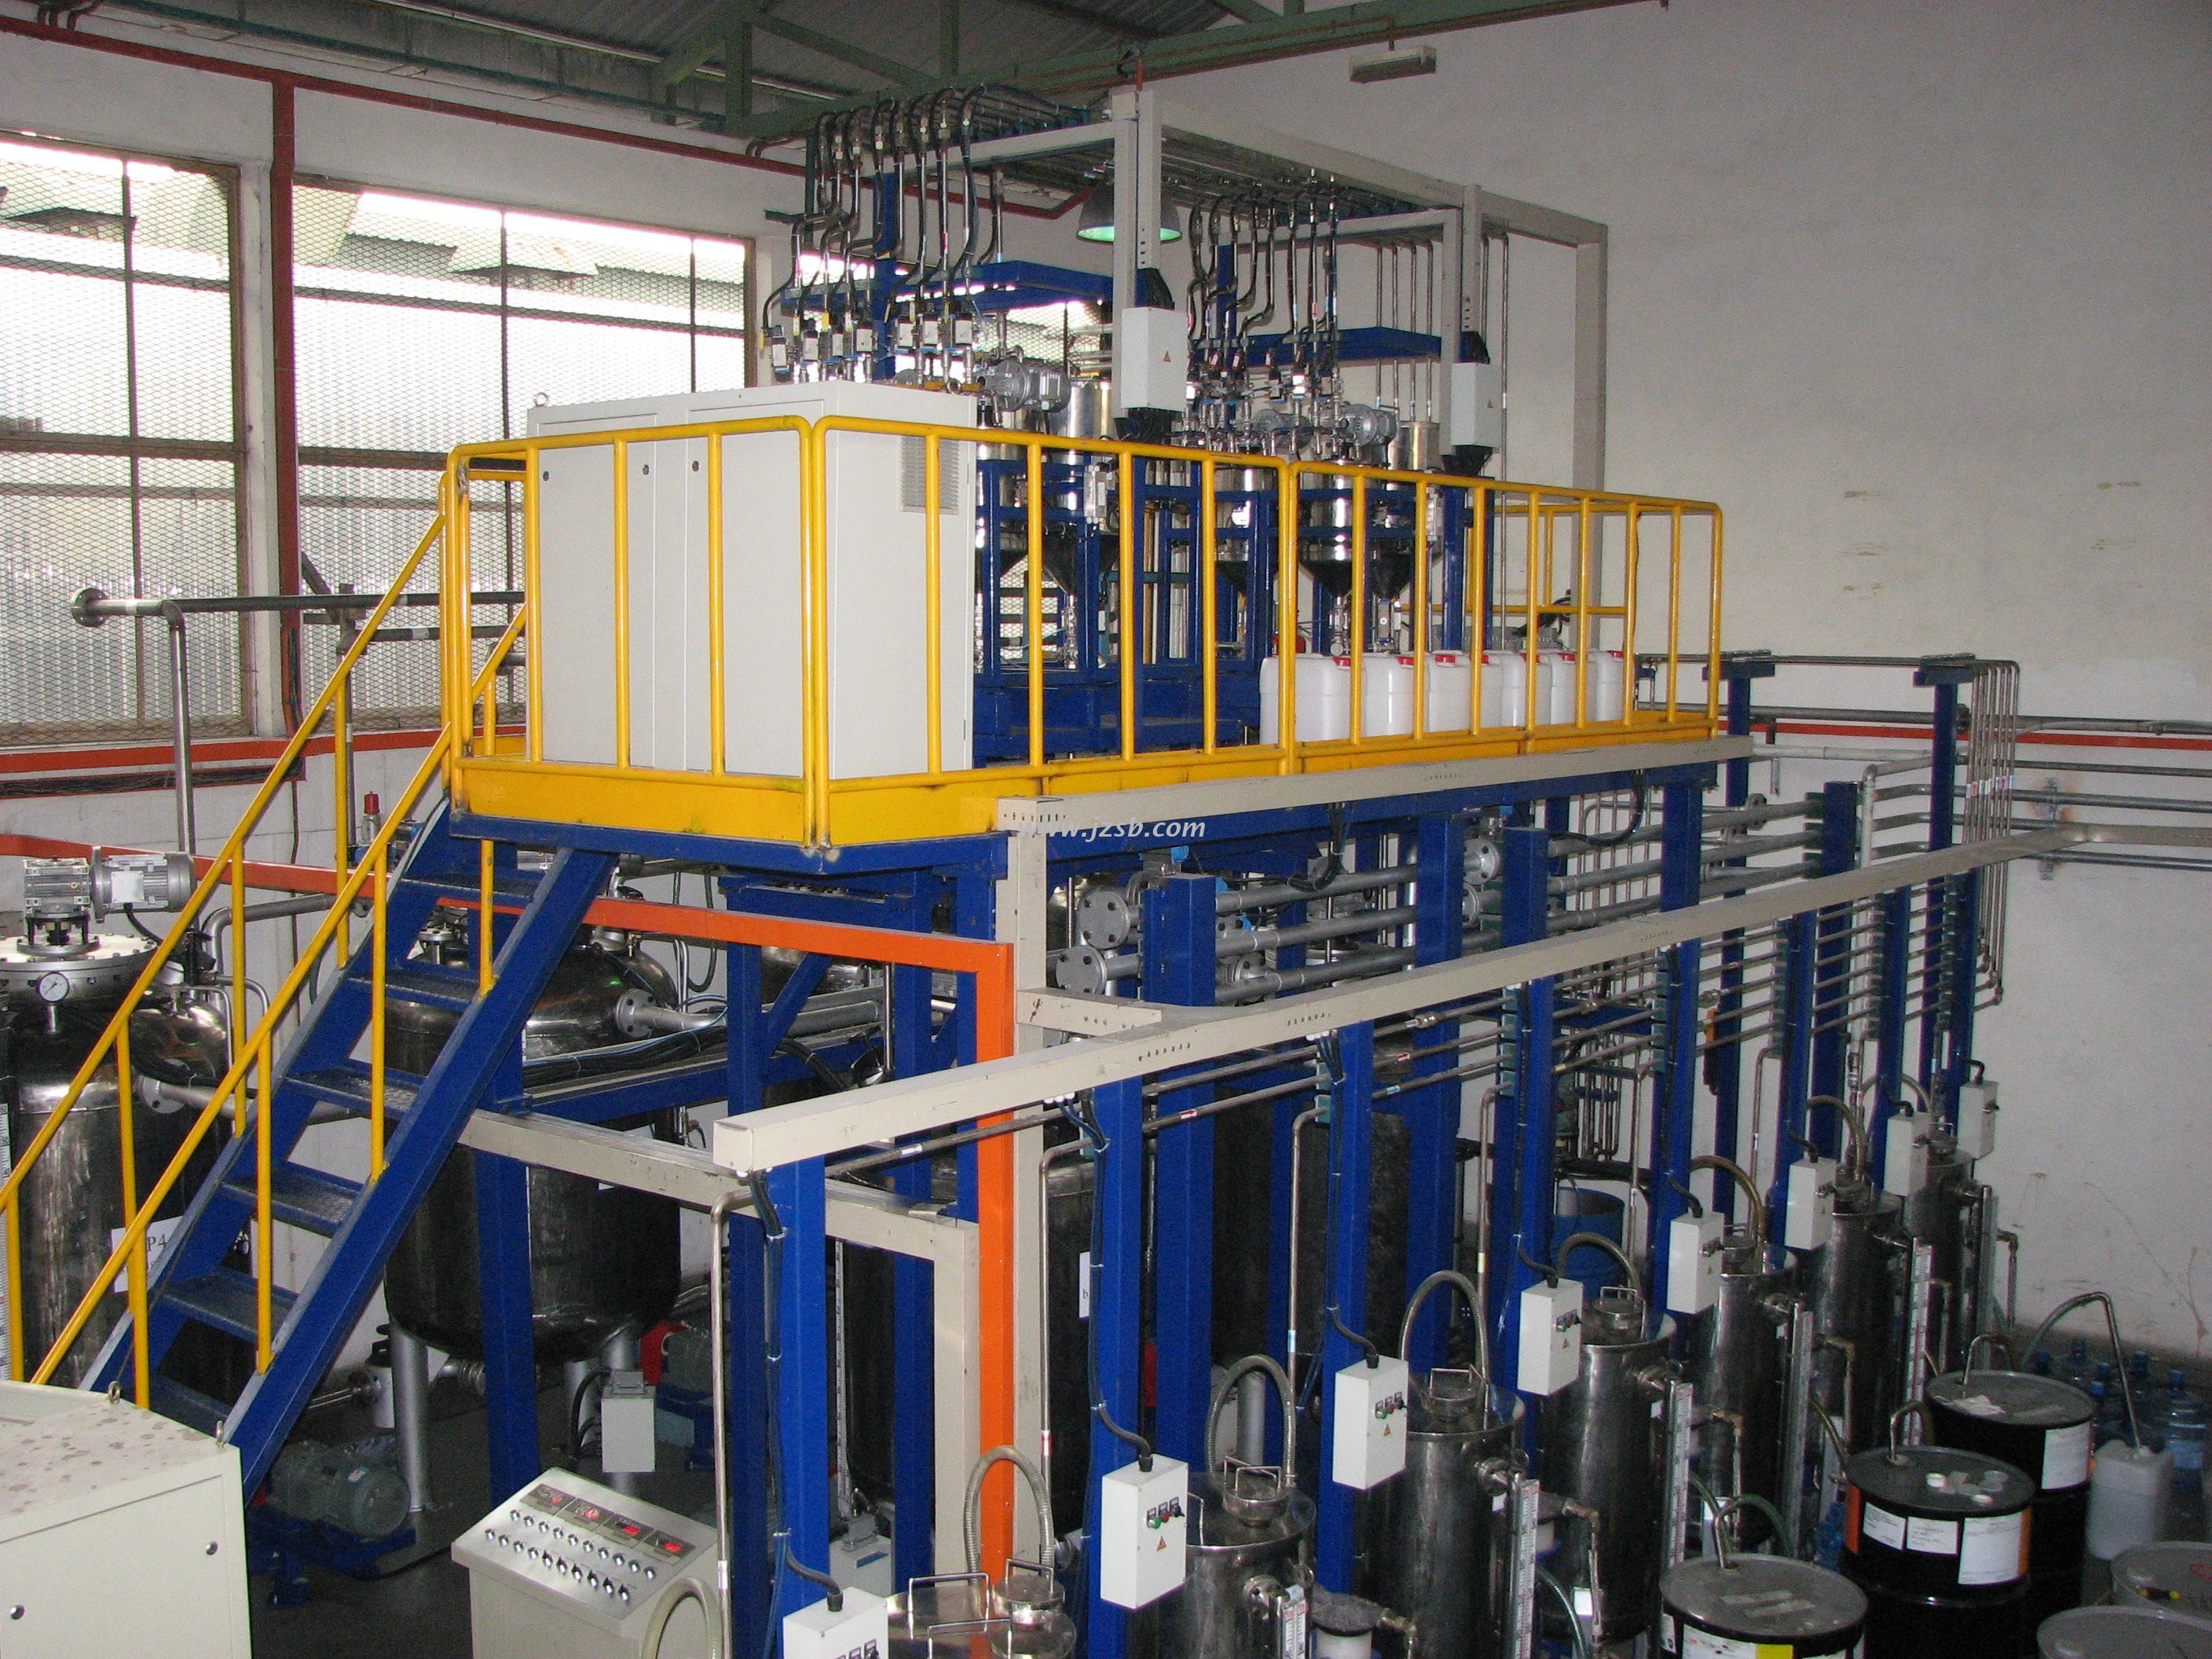 4 component polyol mixing system